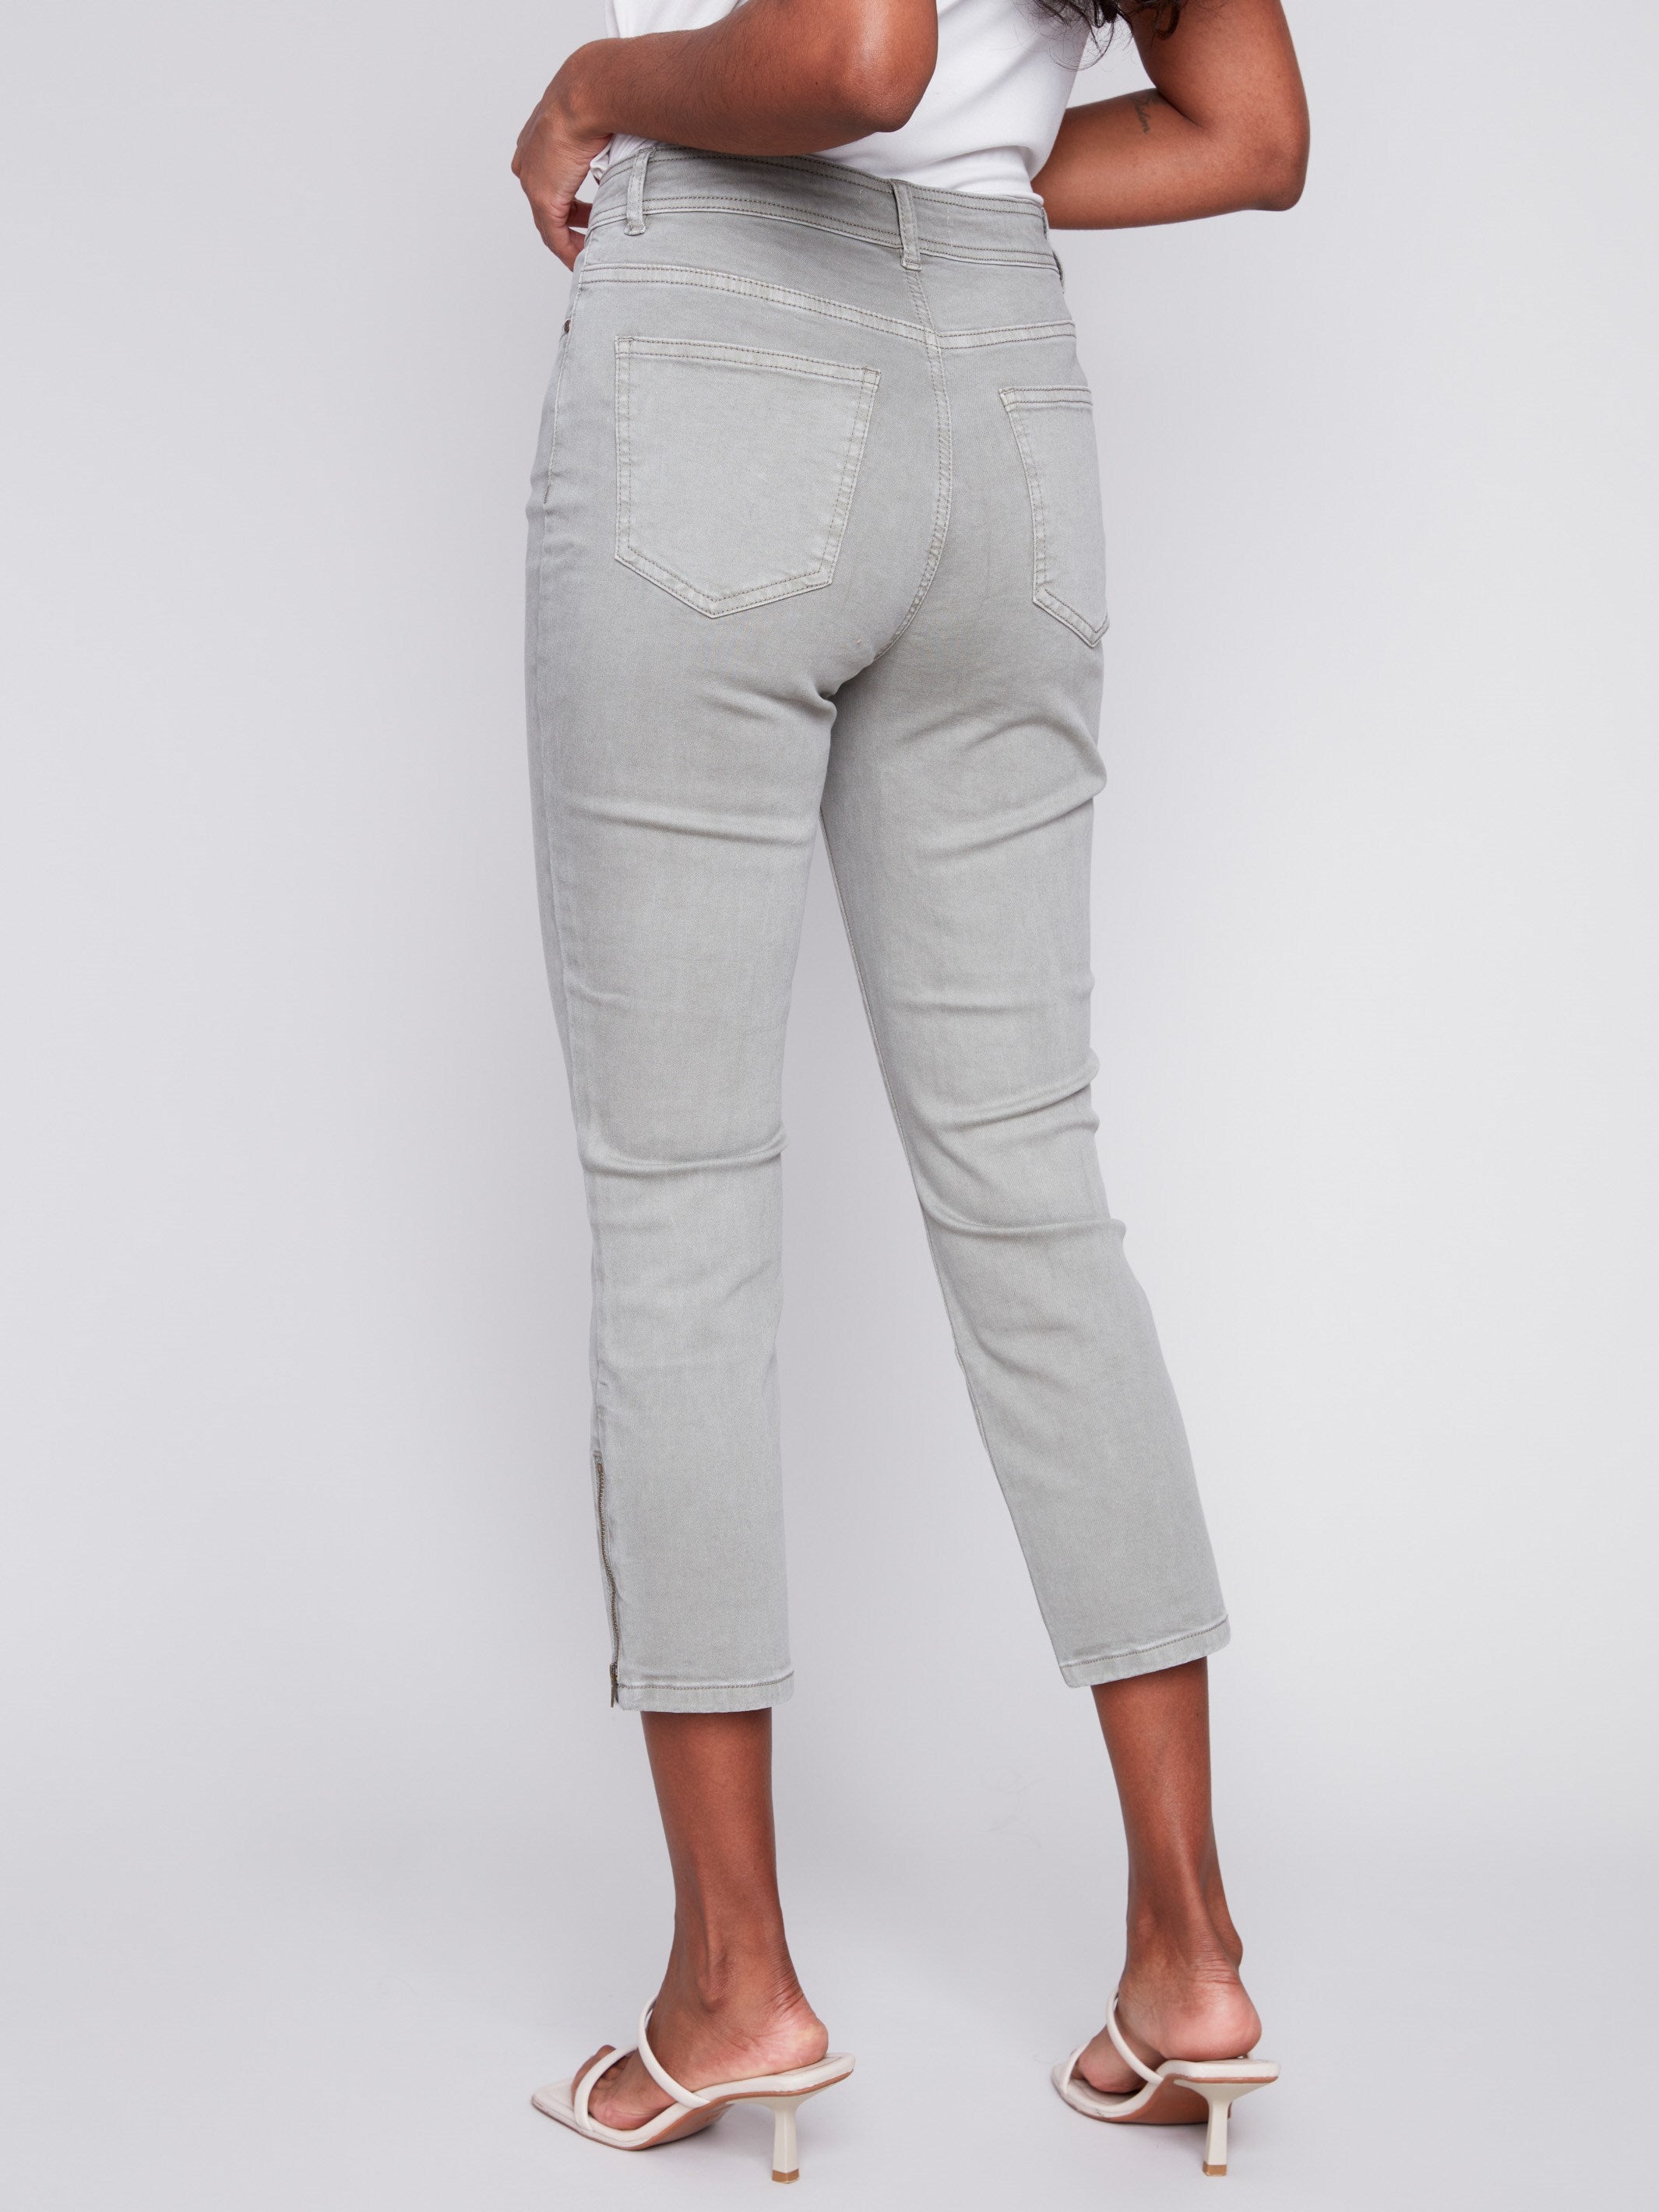 Cropped Twill Pants with Zipper Detail - Celadon - Charlie B Collection Canada - Image 4